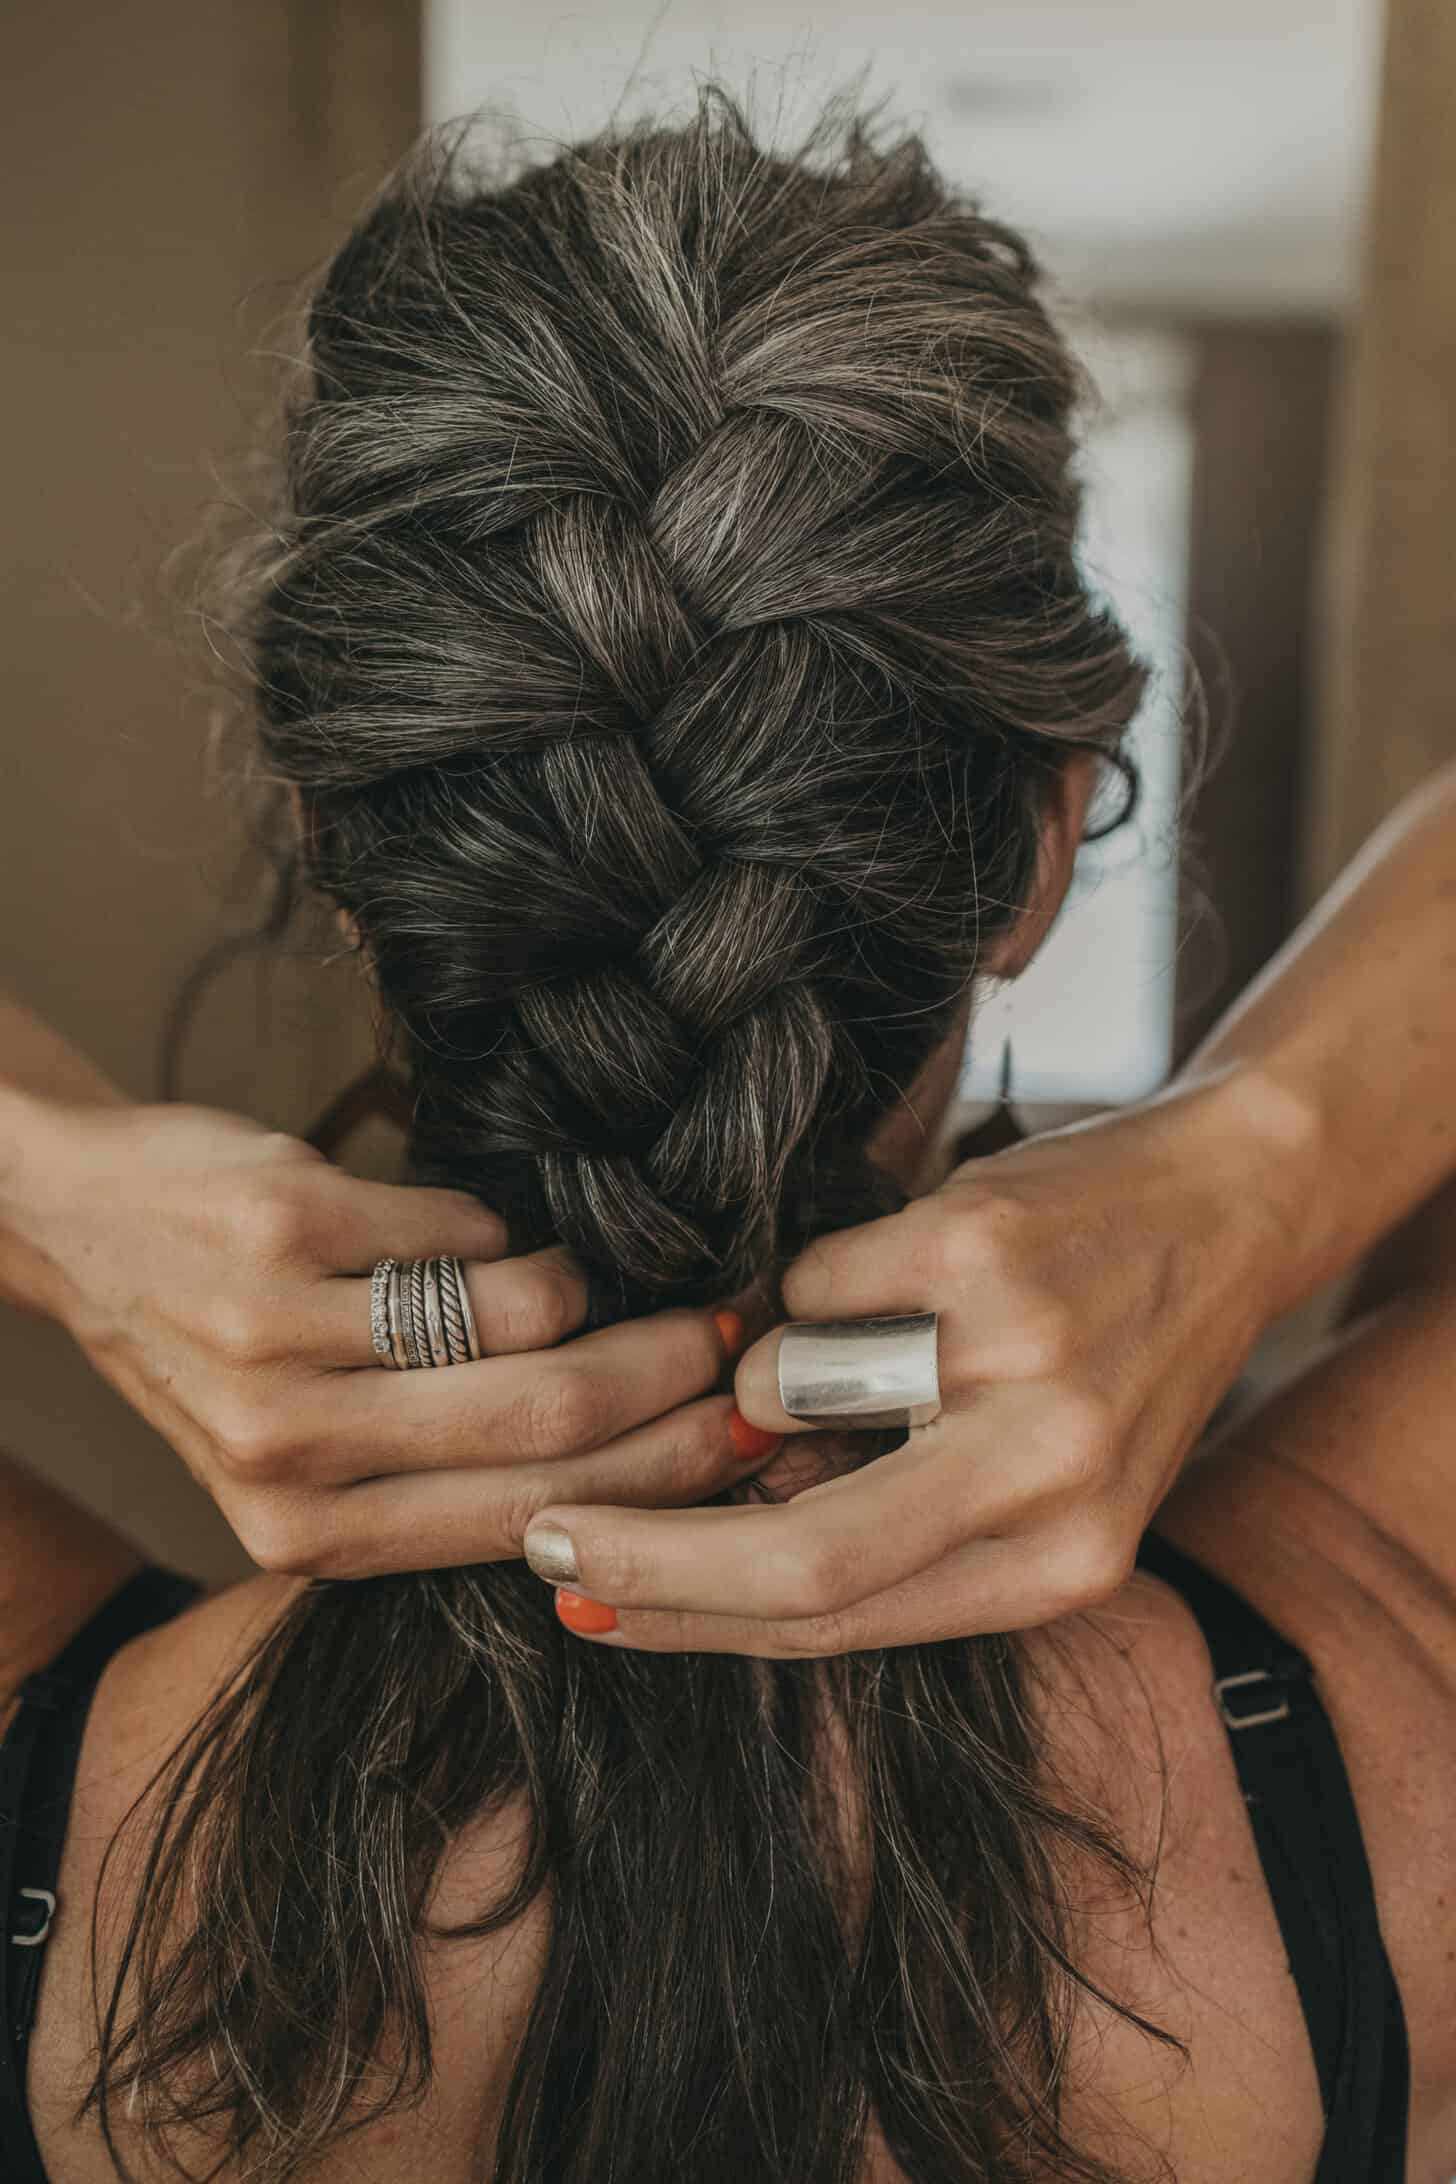 the back of a woman's head as she french braids her hair